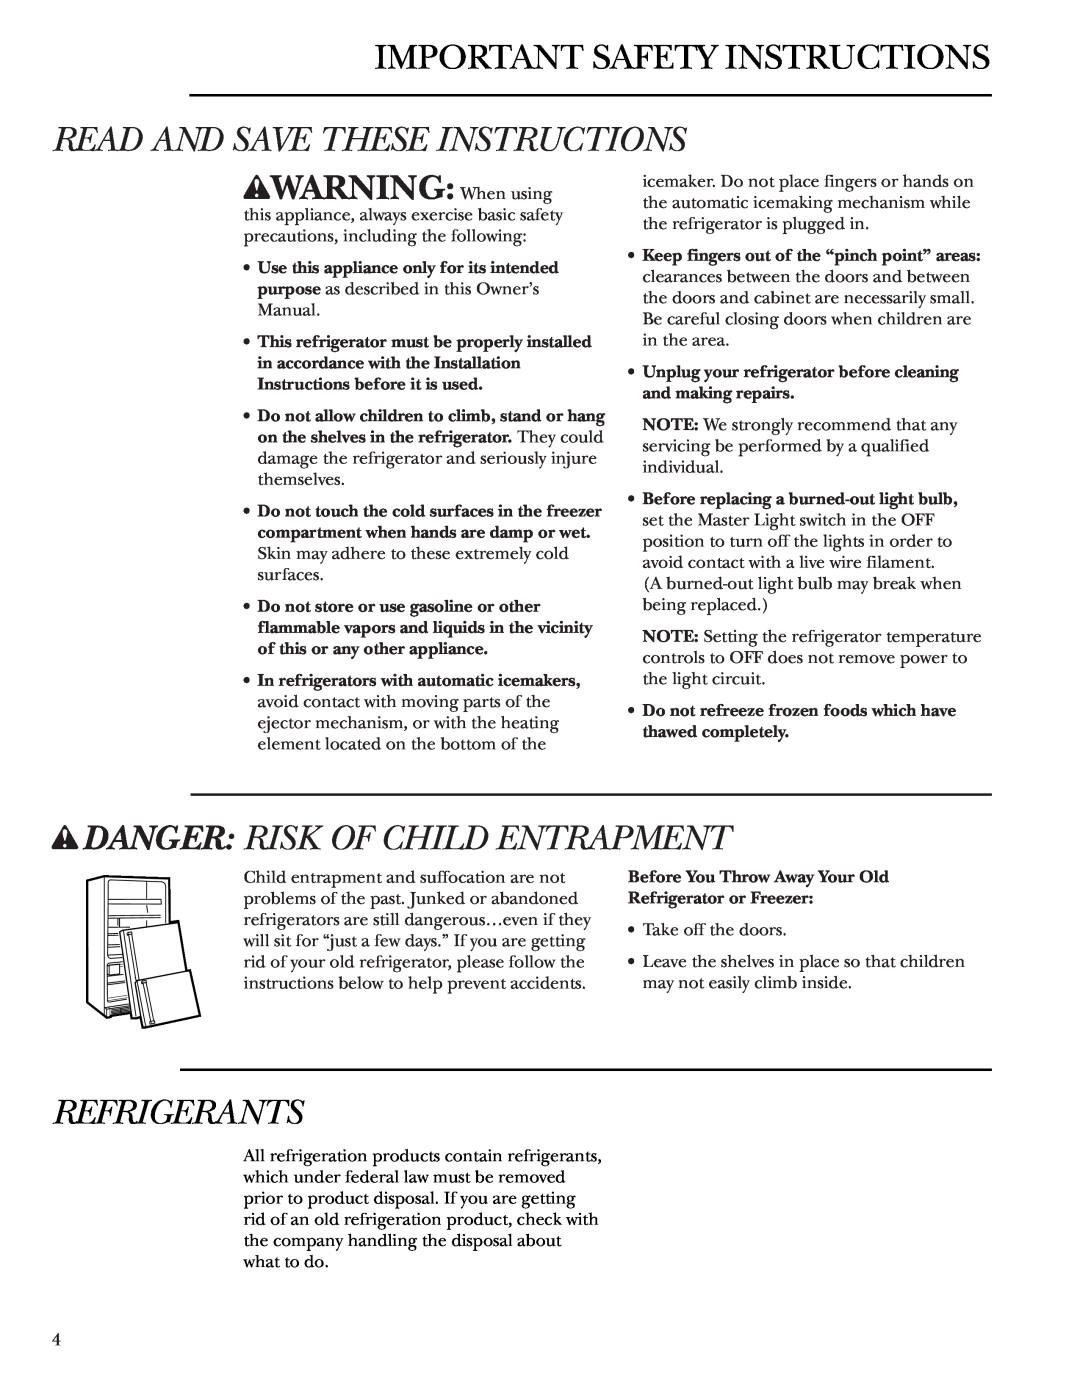 GE Bottom-Freezer Built-In Refrigerators Important Safety Instructions, Read And Save These Instructions, Refrigerants 